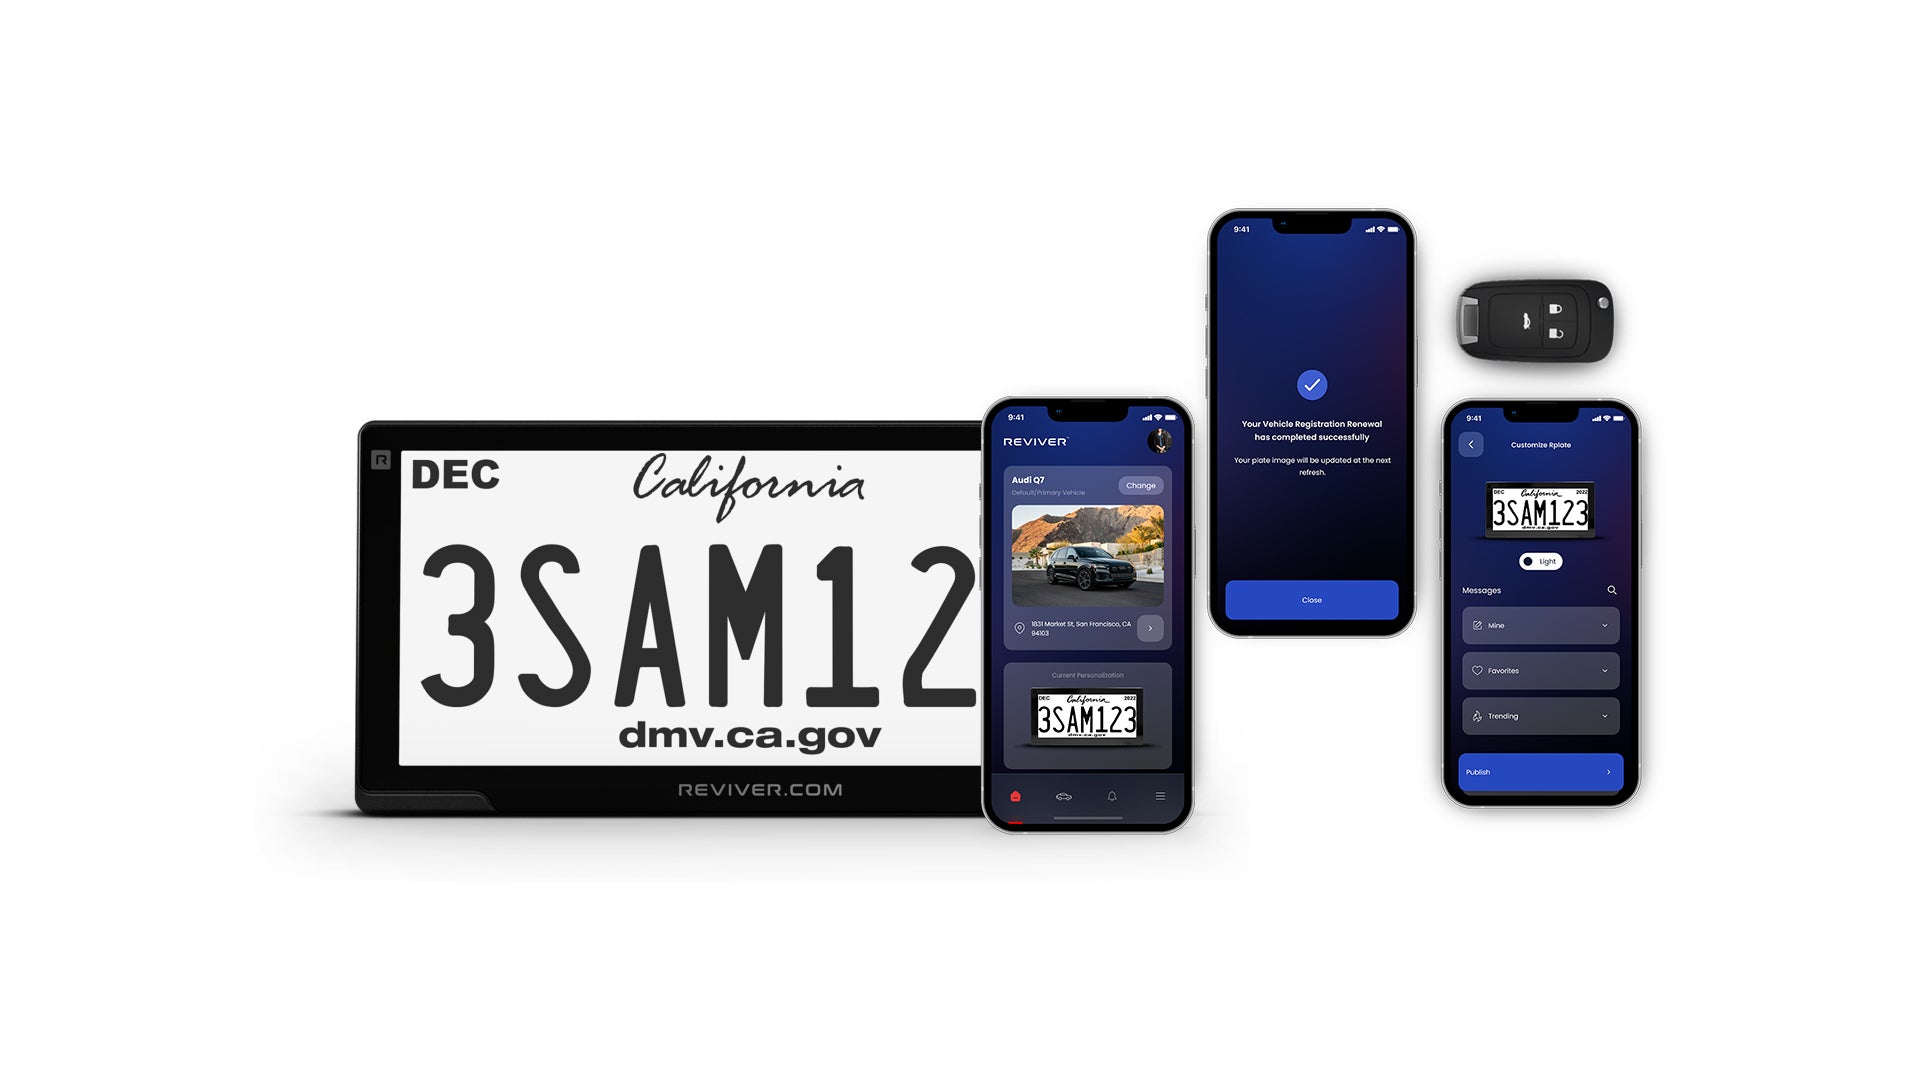 Hackers Exploited California’s Fancy Digital License Plates to Locate Cars